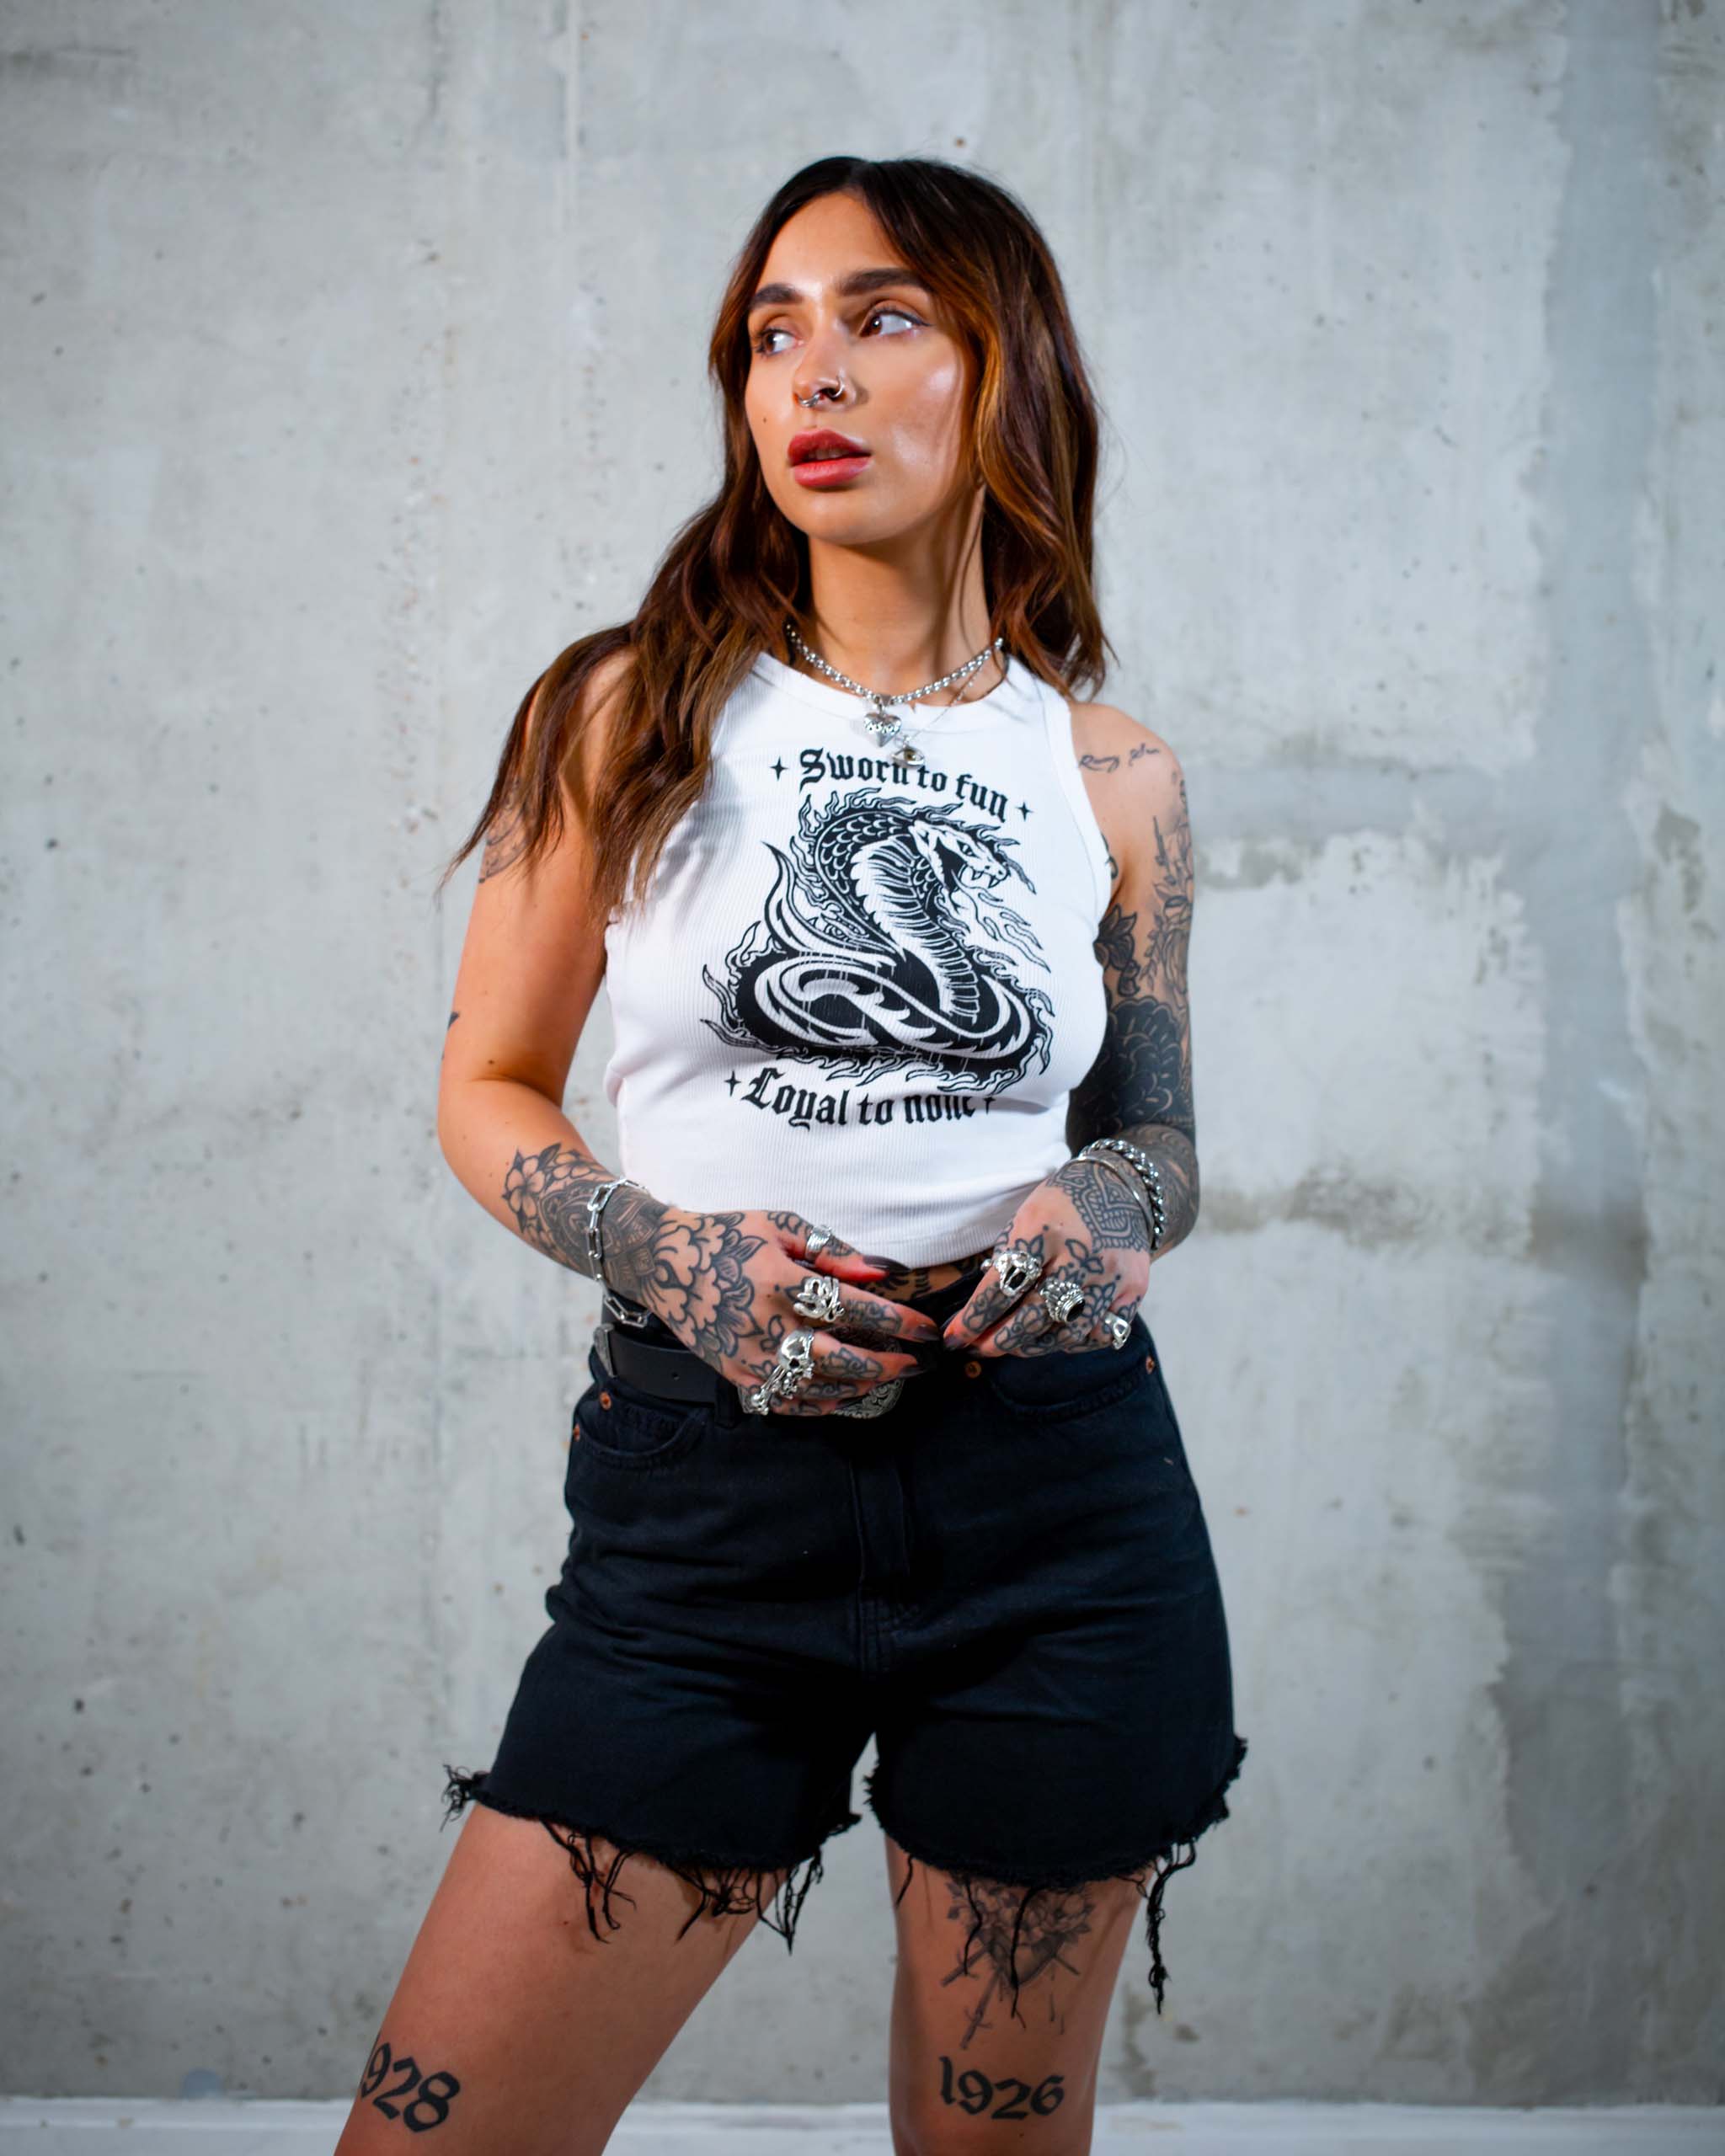 The Sworn to Fun cobra tank top by Sleazy Rider, featuring a tattoo style cobra graphic.